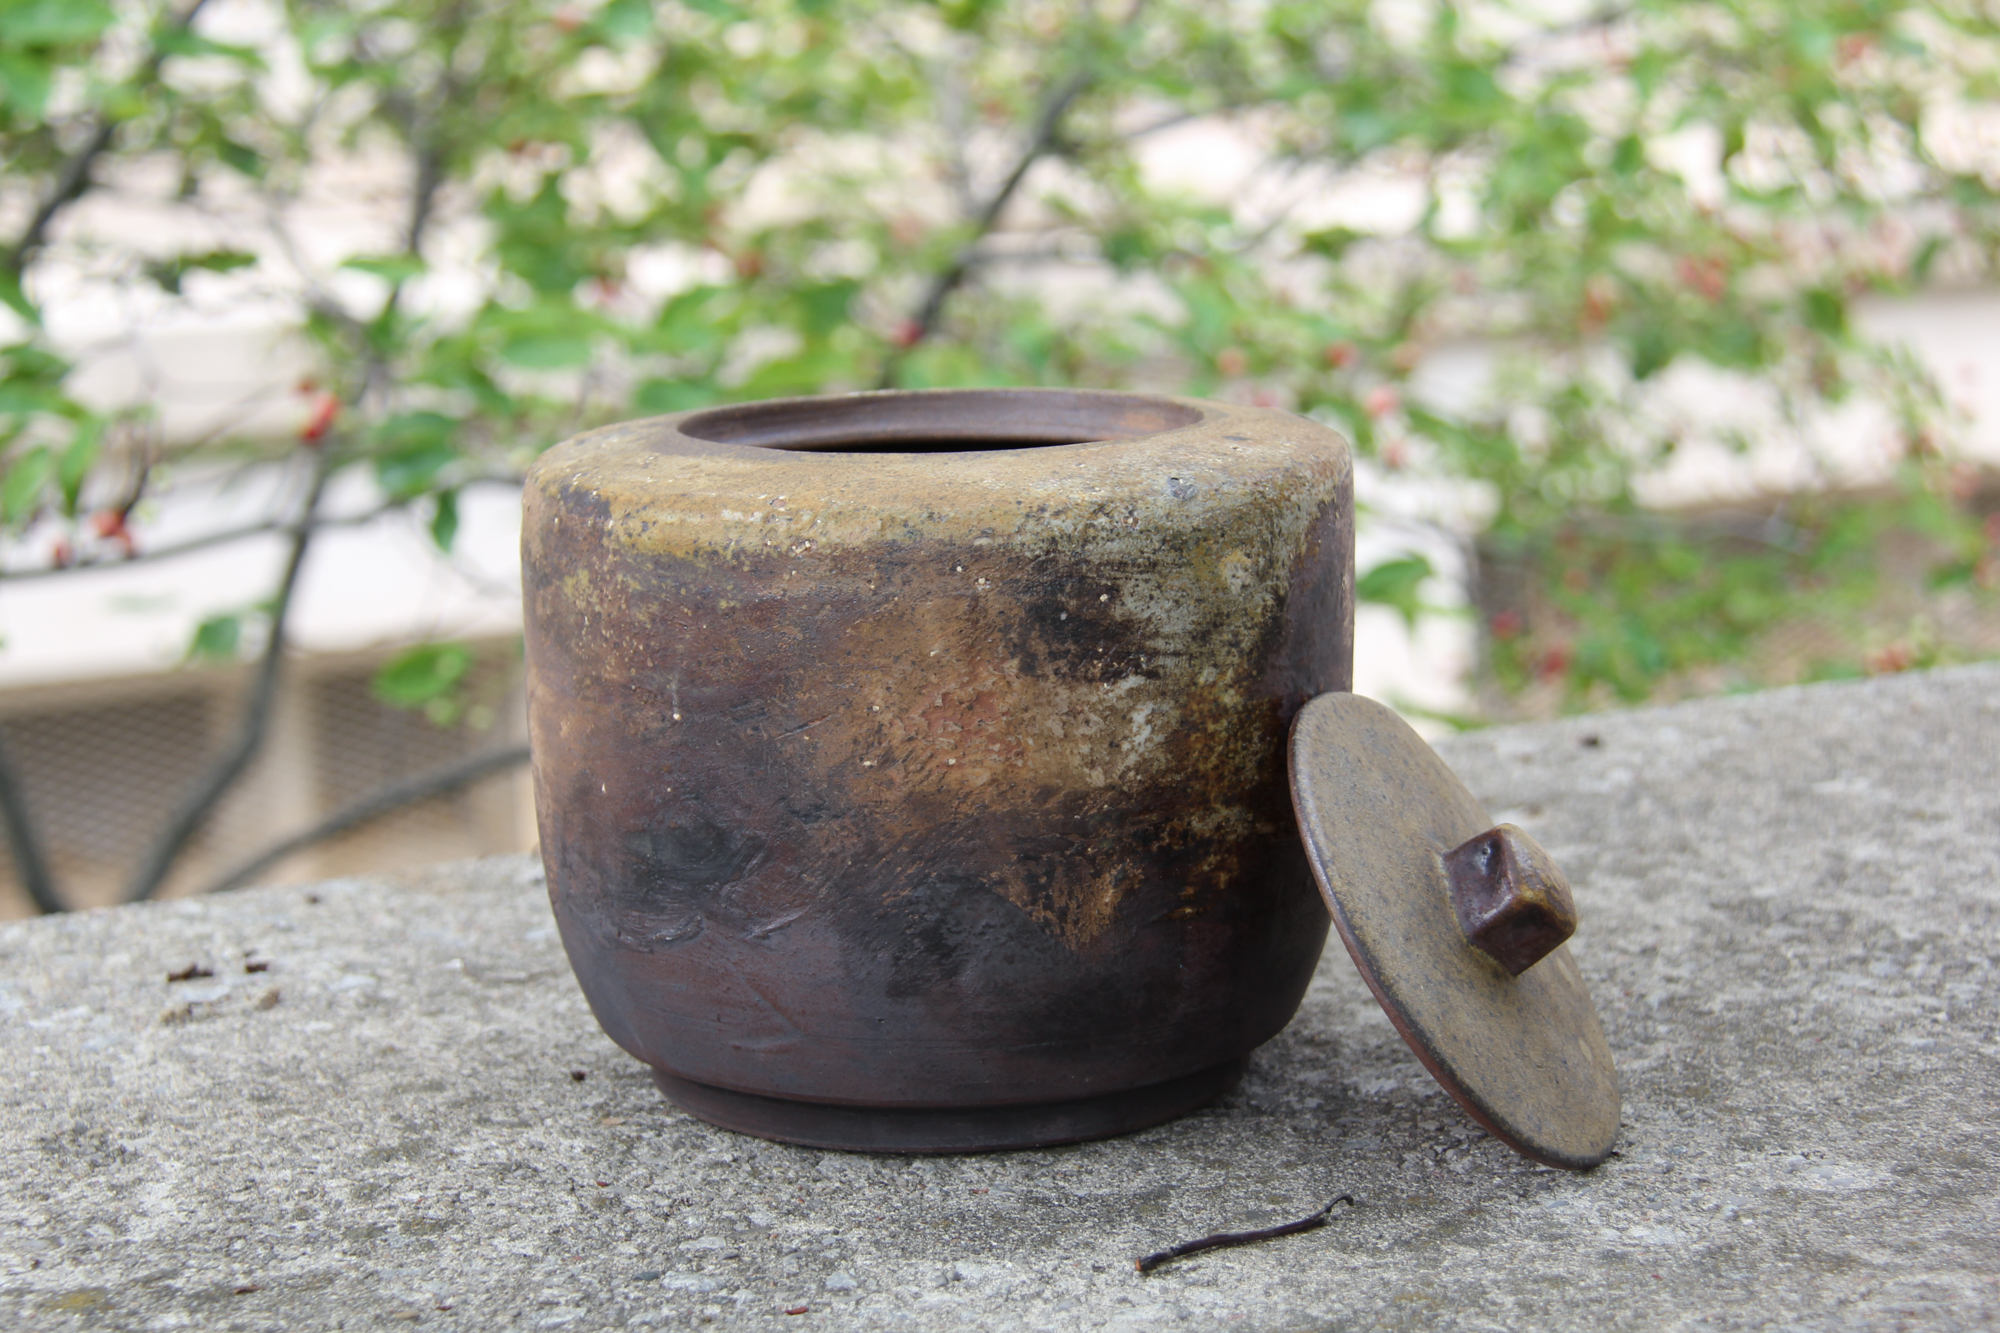 John Ikeda: Longwater Jar with Lid for Tea Ceremony Product Image 6 of 6